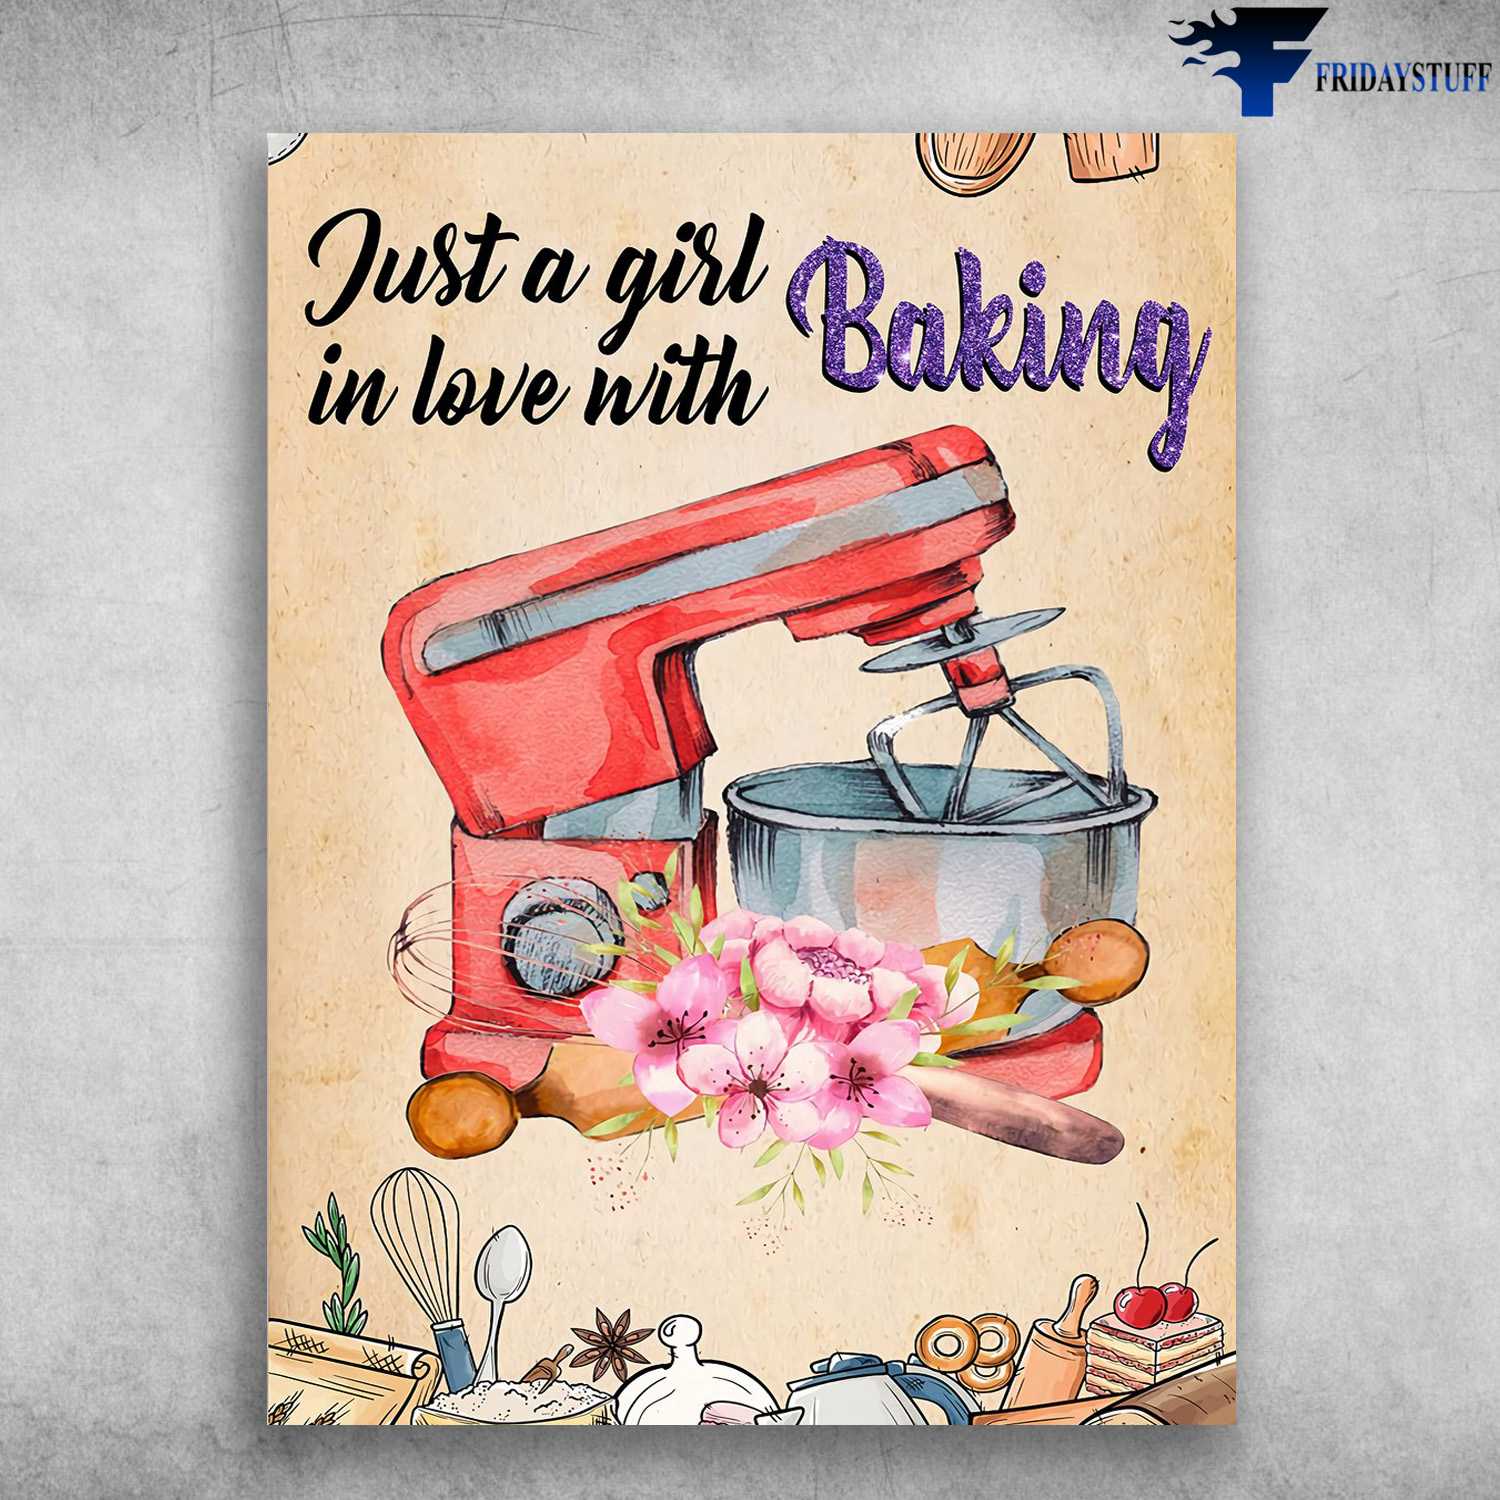 Baking Poster, Baking Cake - Just A Girl, In Love With Baking